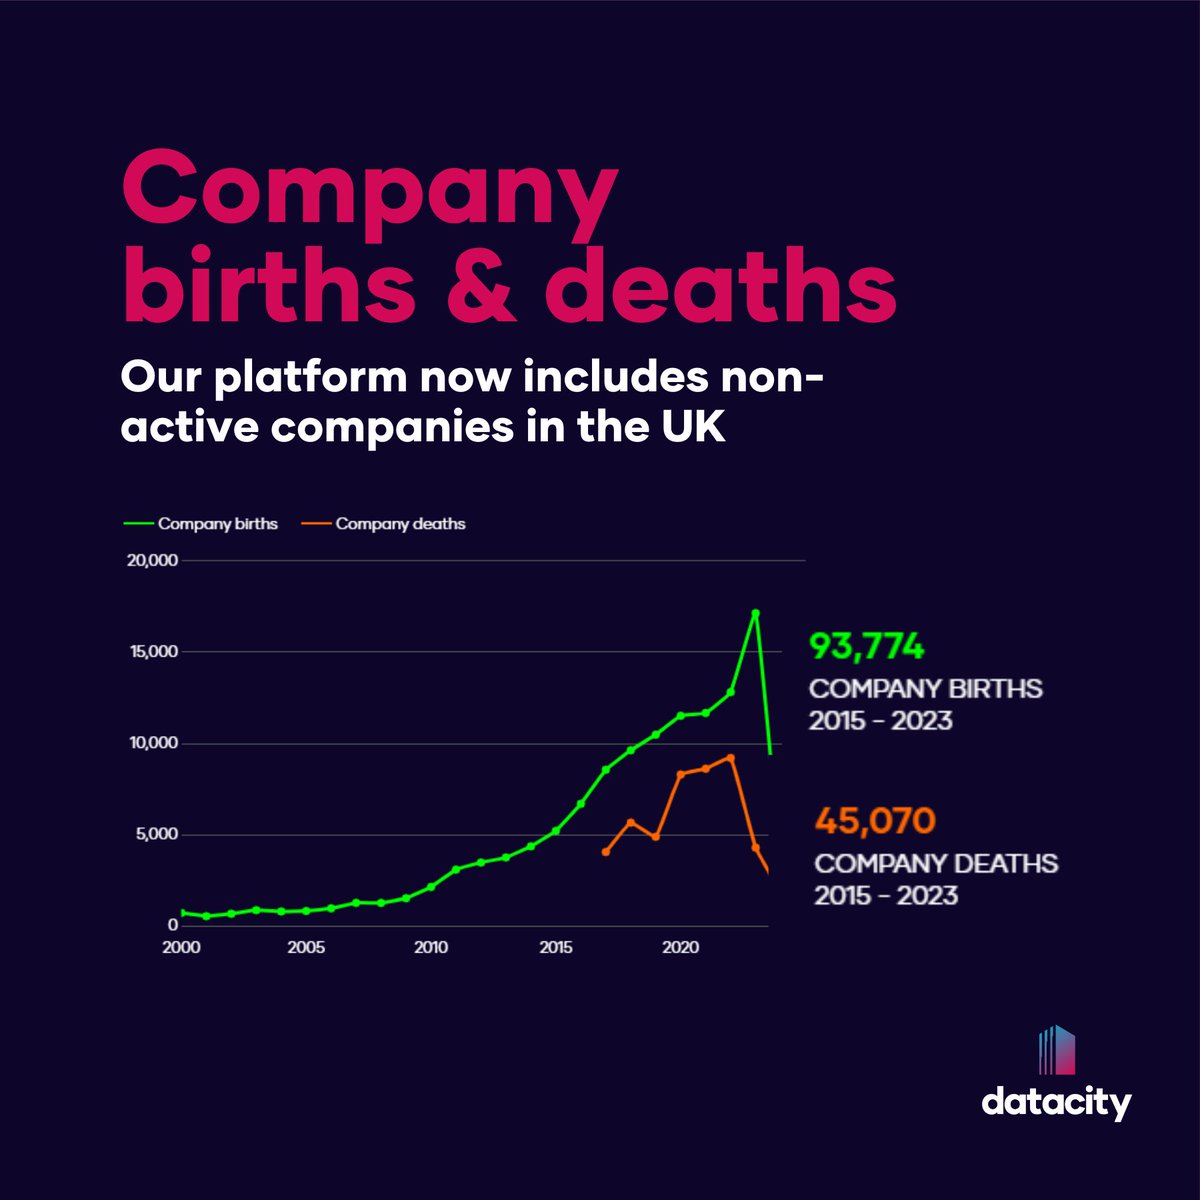 Company births & deaths are now live in platform 💀 With our most recent 4.14 release, we've updated our platform to include non-active companies in the UK. This takes our database to over 9 million total companies. See the data in action at thedatacity.com/free-trial/